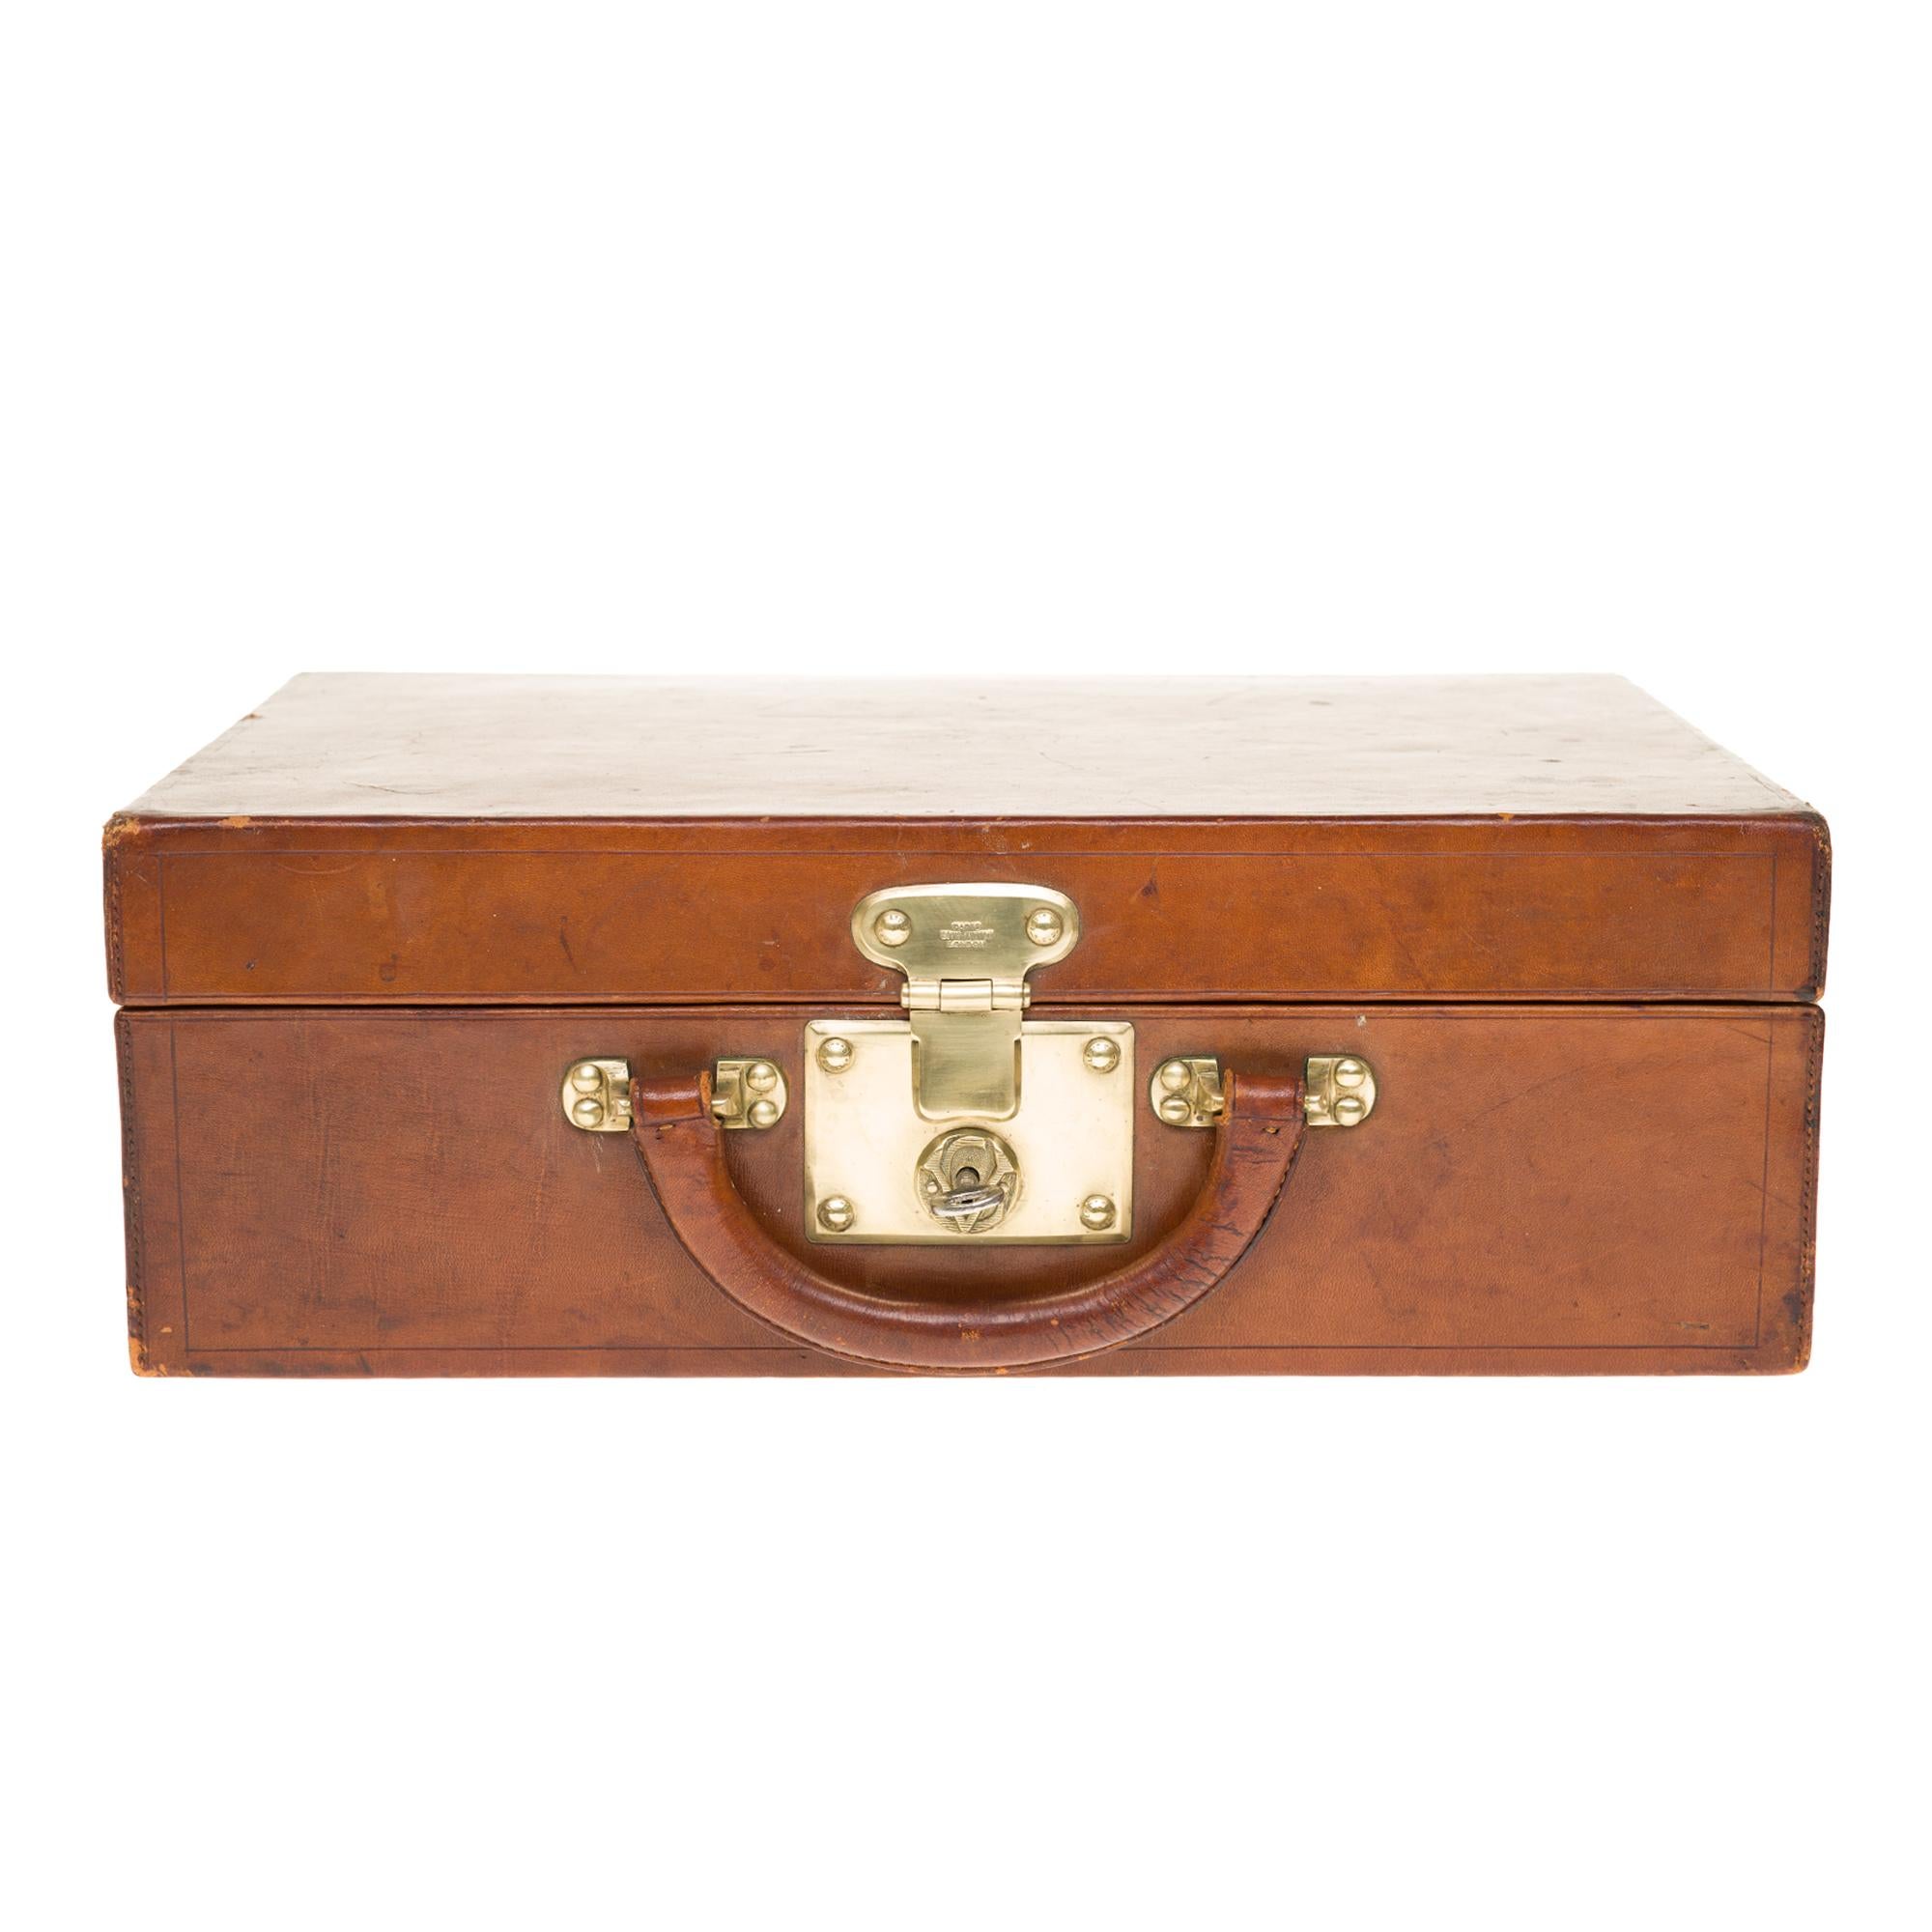 Beautiful decorative and collectible object:


LOUIS VUITTON CIRCA 1920

Very RARE Brown cowhide leather suitcase-vanity.
Brass fittings and fittings.
Locking system with key and nails marked and monogrammed LOUIS VUITTON.
Inside: leather-wrapped